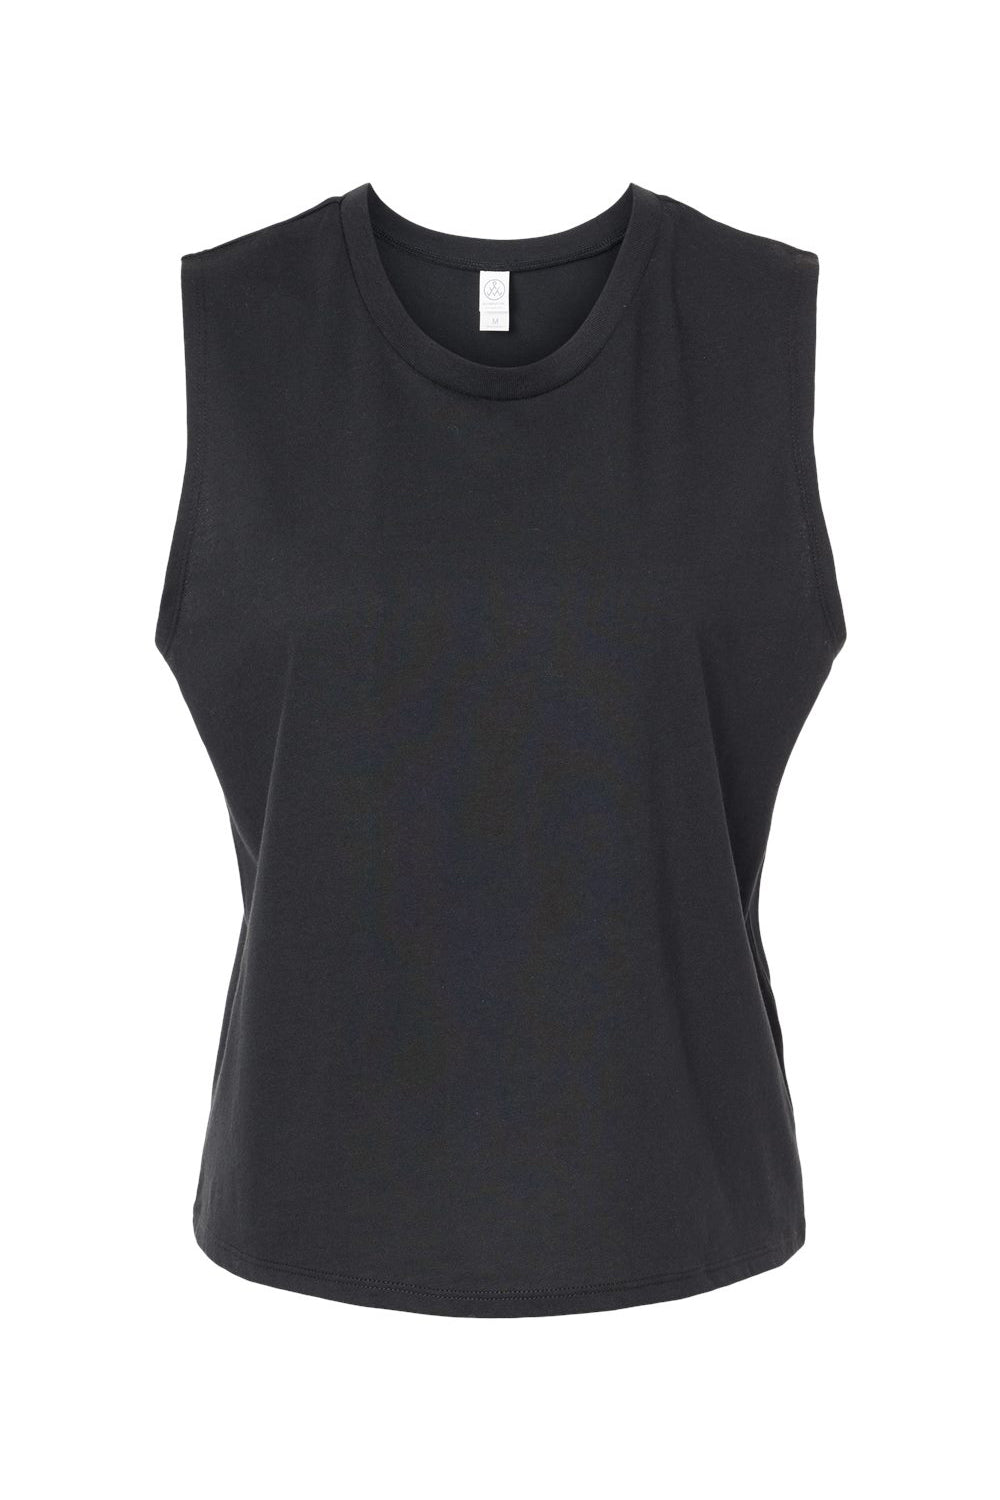 Alternative 1174 Womens Go To Crop Muscle Tank Top Black Flat Front